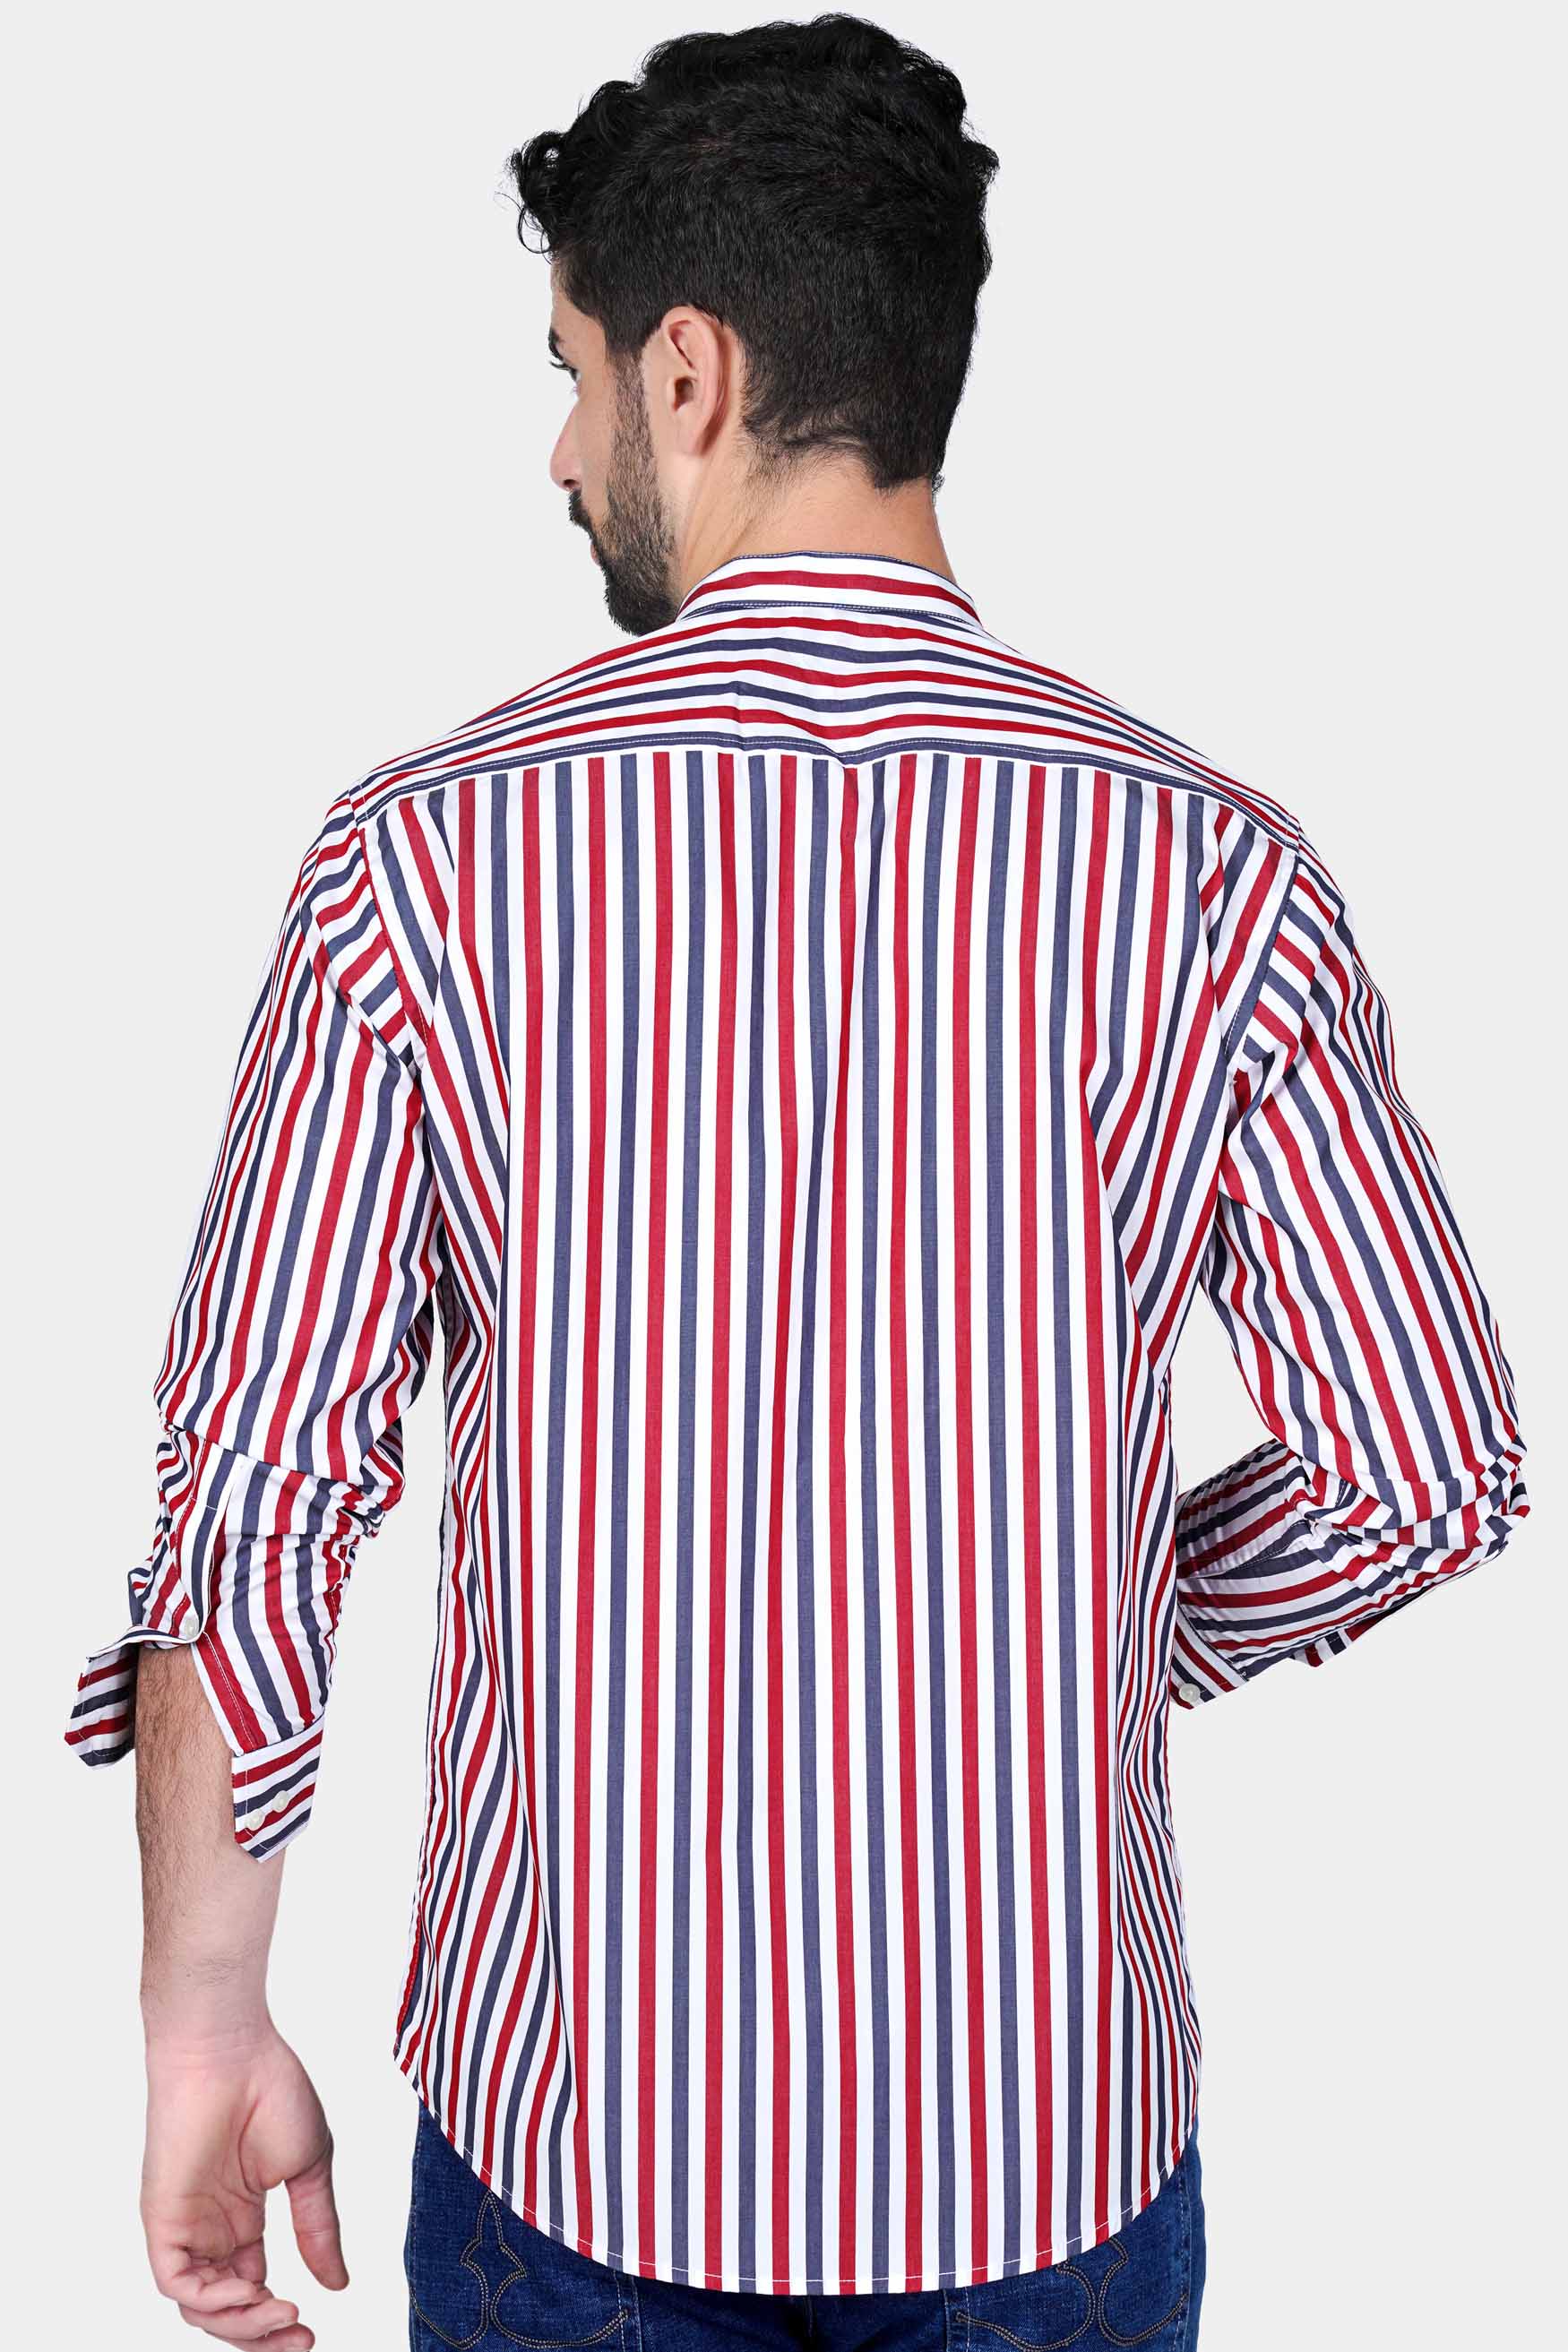 Bright White with Carmine Red and Scampi Blue Striped with Bird Patchwork Premium Cotton Designer Shirt 6120-M-E339-38, 6120-M-E339-H-38, 6120-M-E339-39, 6120-M-E339-H-39, 6120-M-E339-40, 6120-M-E339-H-40, 6120-M-E339-42, 6120-M-E339-H-42, 6120-M-E339-44, 6120-M-E339-H-44, 6120-M-E339-46, 6120-M-E339-H-46, 6120-M-E339-48, 6120-M-E339-H-48, 6120-M-E339-50, 6120-M-E339-H-50, 6120-M-E339-52, 6120-M-E339-H-52